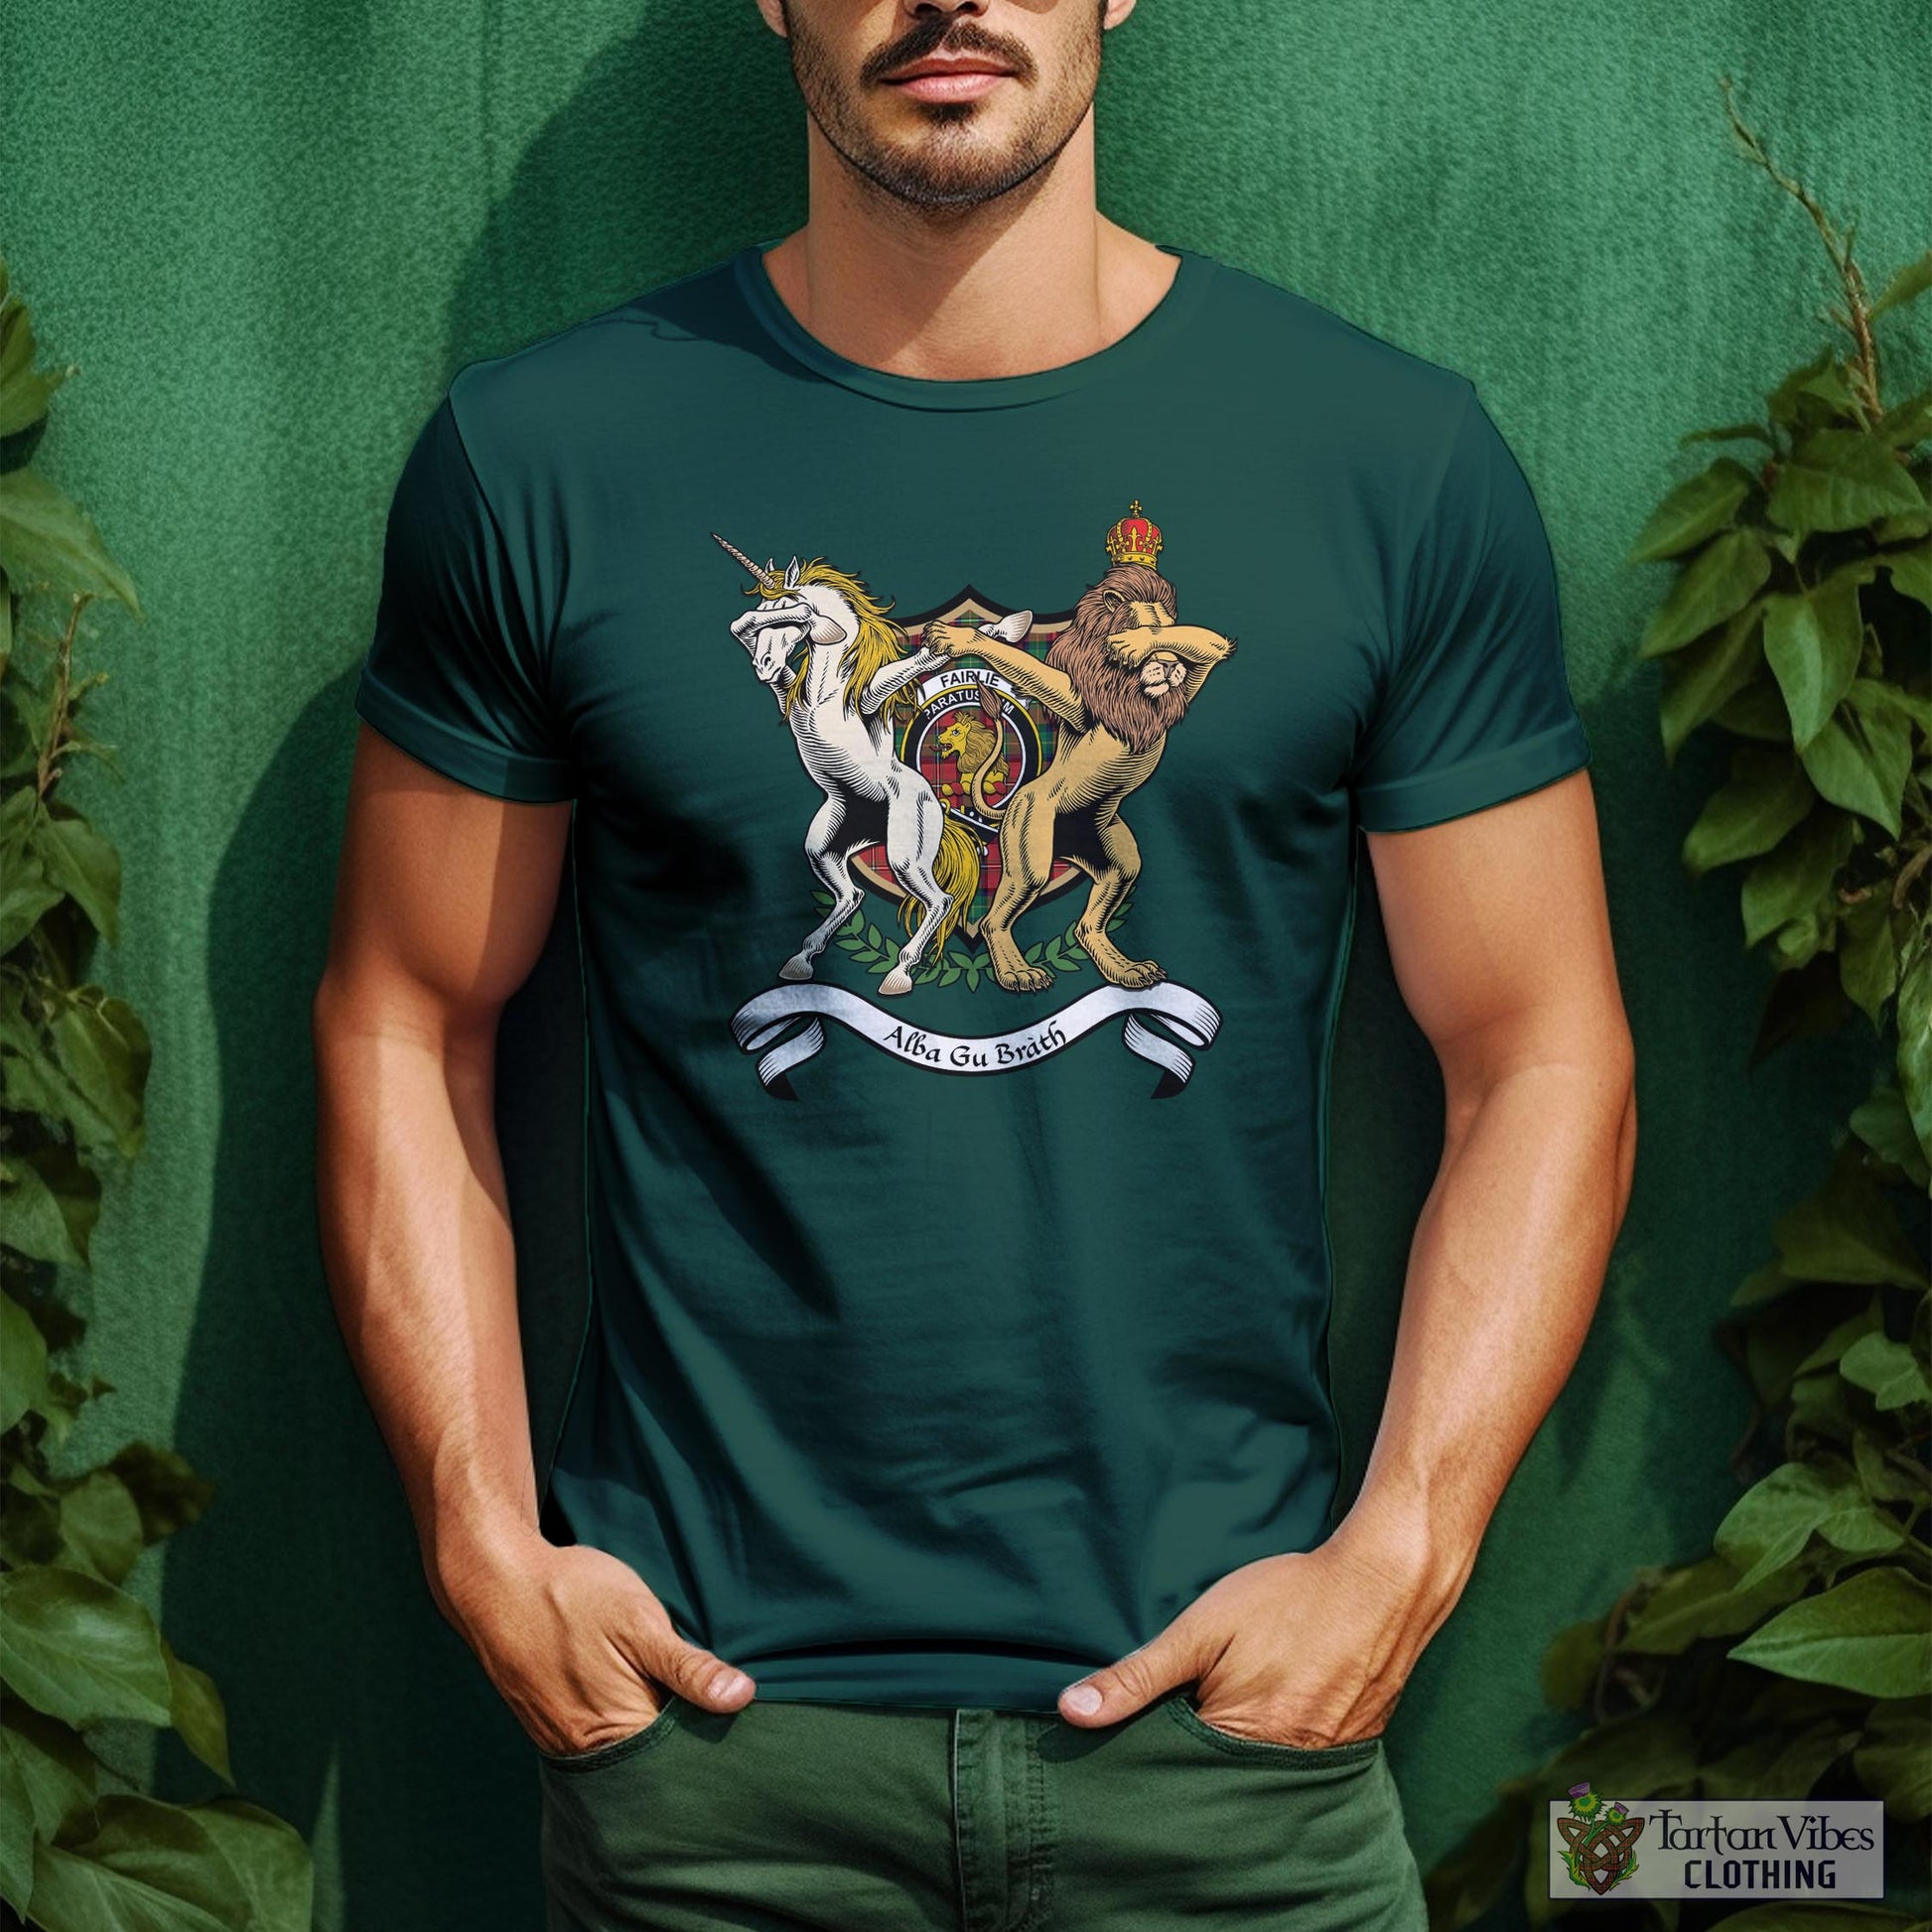 Tartan Vibes Clothing Fairlie Modern Family Crest Cotton Men's T-Shirt with Scotland Royal Coat Of Arm Funny Style